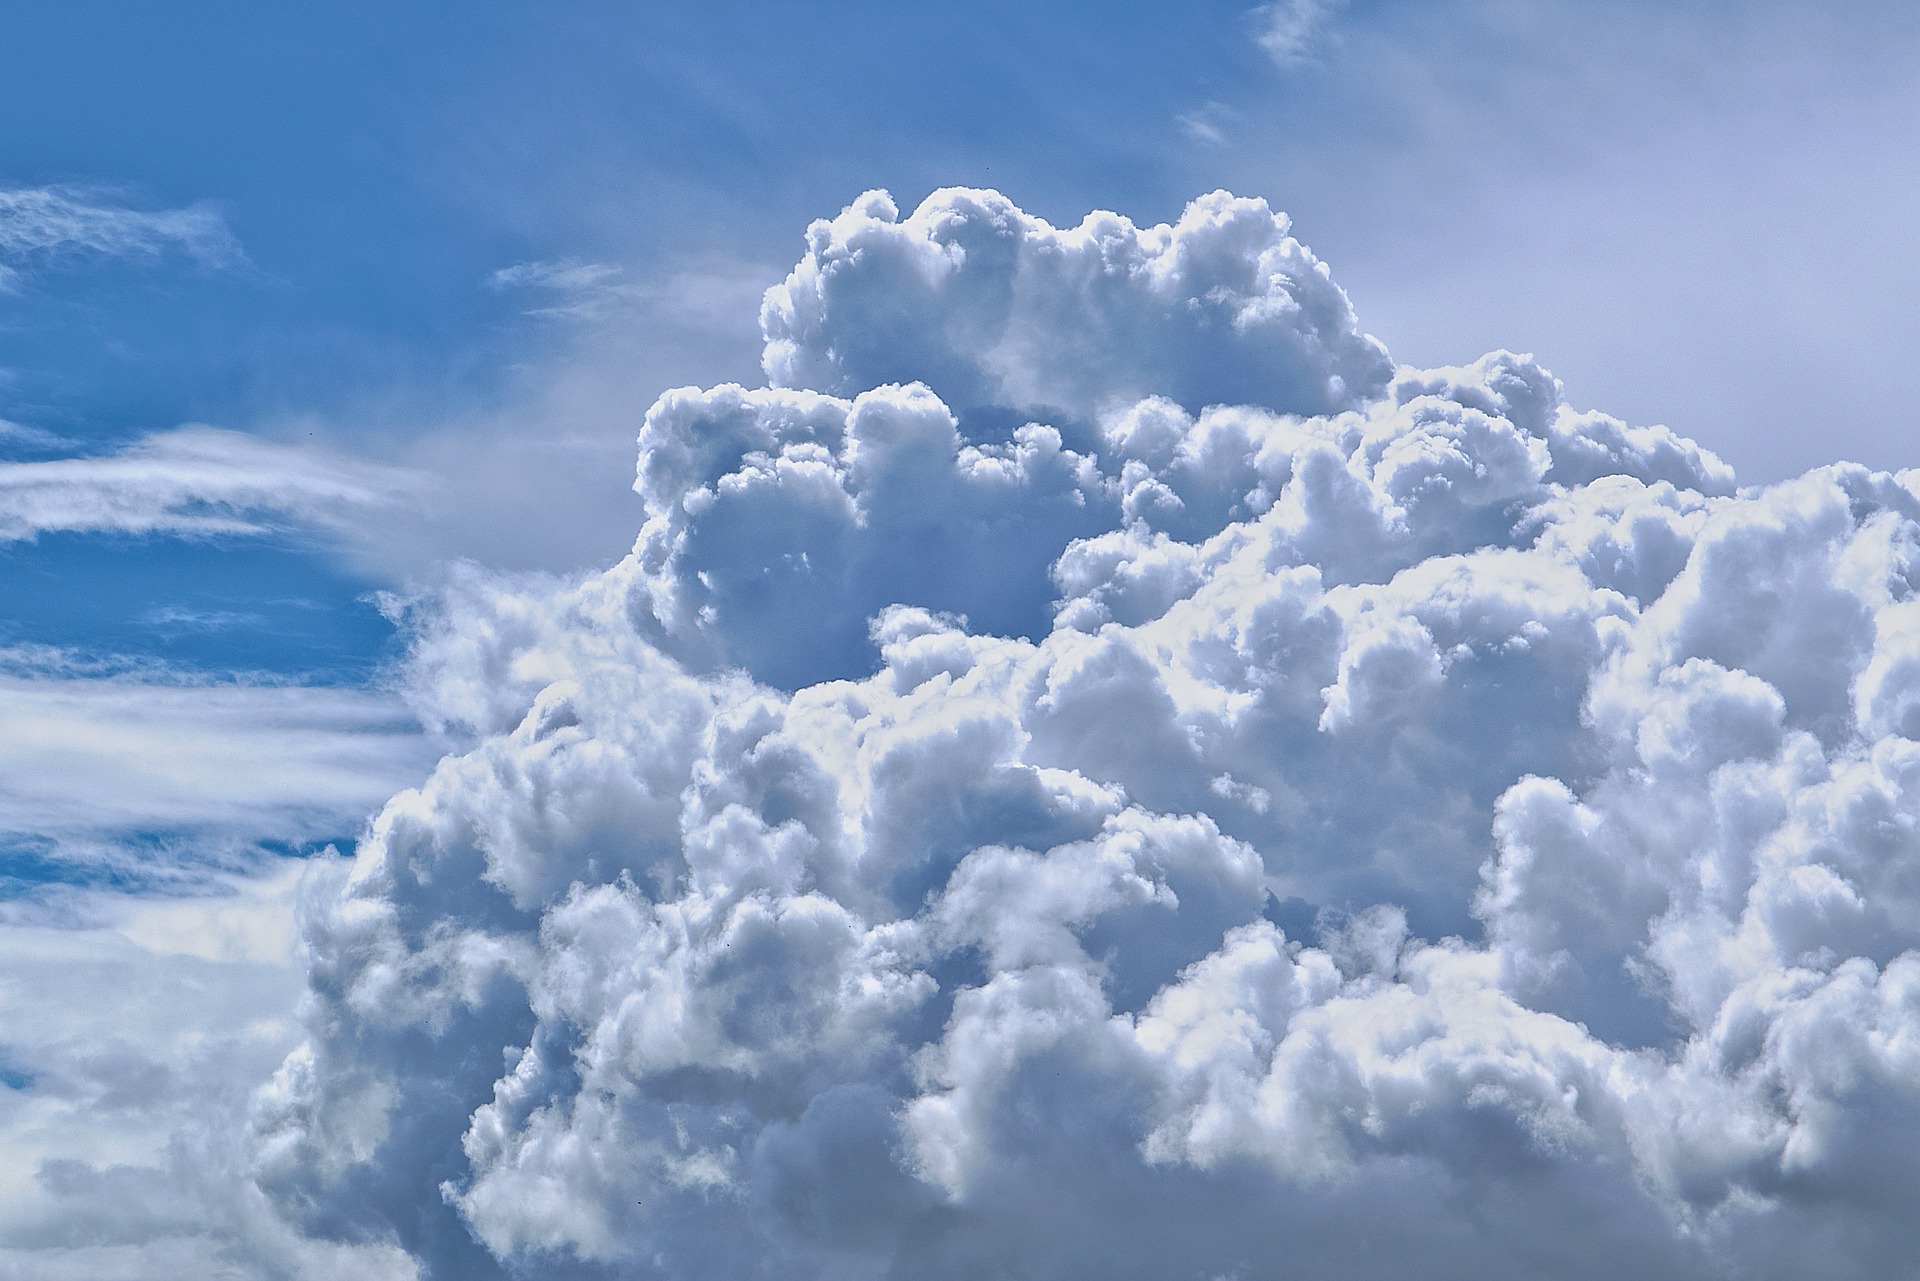 Clouds. Pixabay License Free for commercial use No attribution required